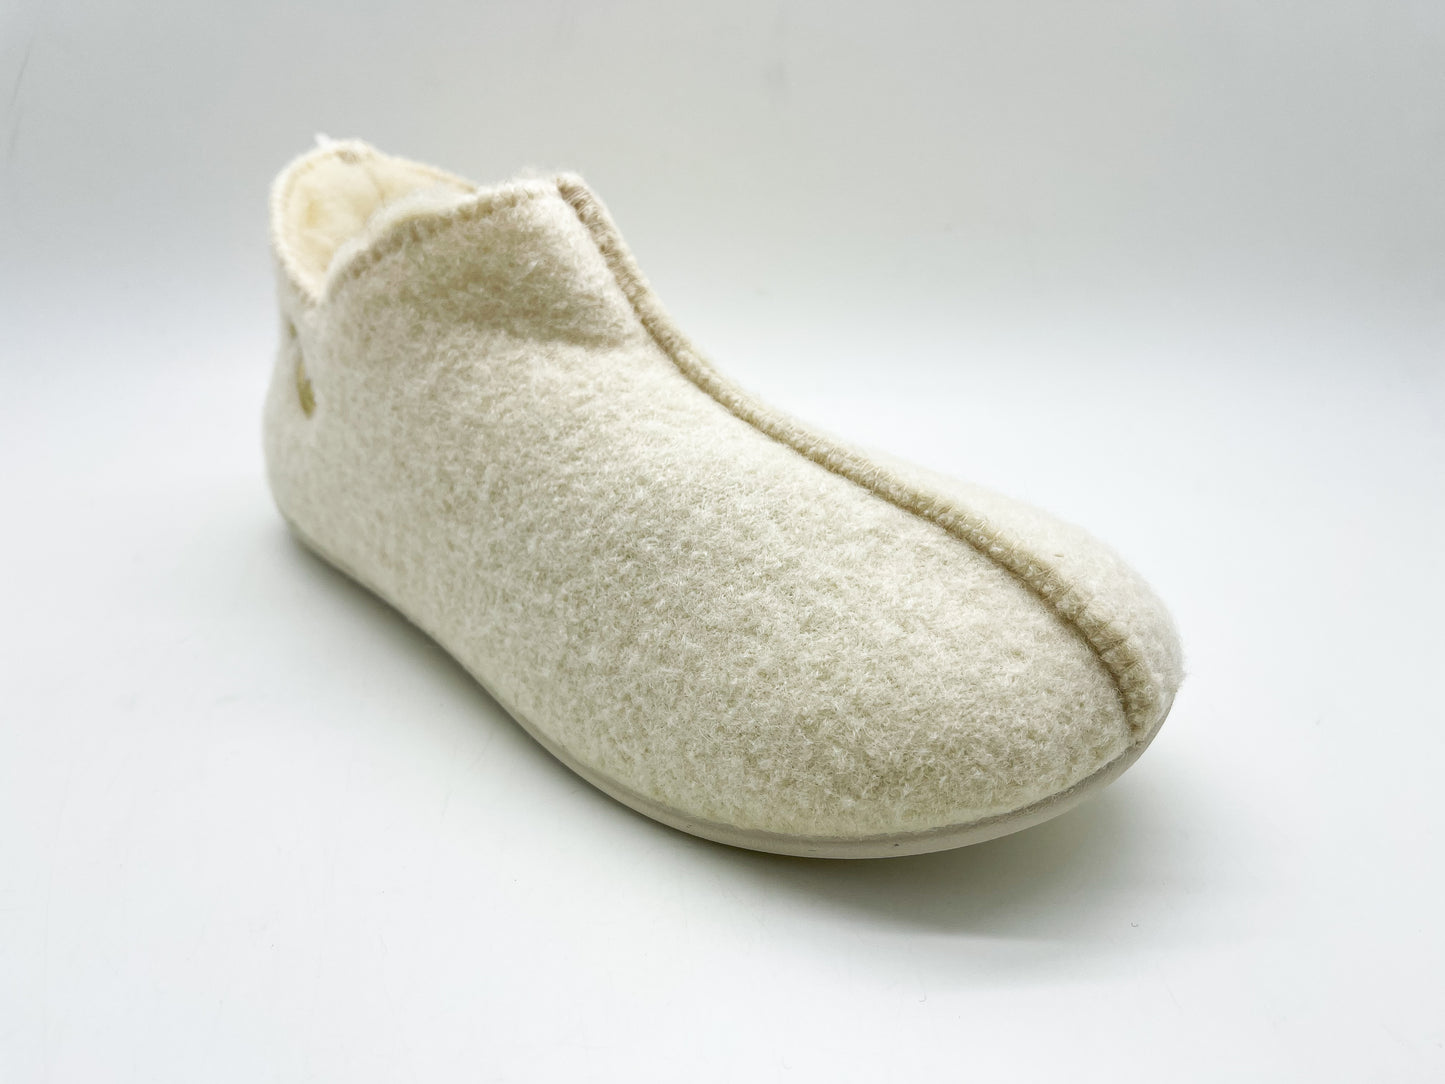 thies 1856 ® Slipper Boots off white with Eco Wool (W)